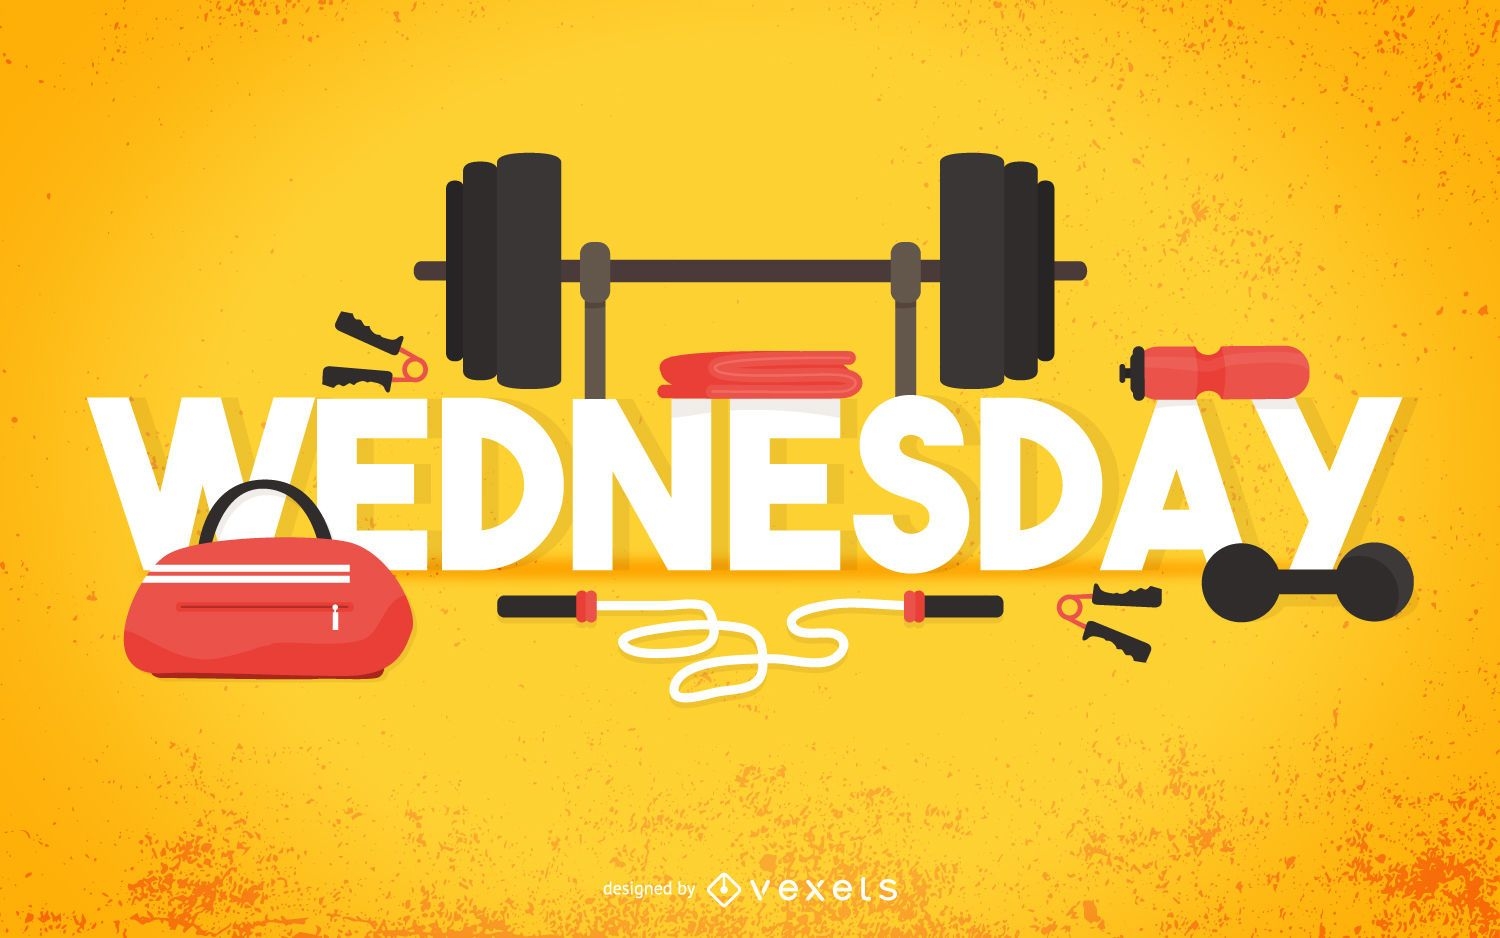 Wednesday gym poster - Vector download